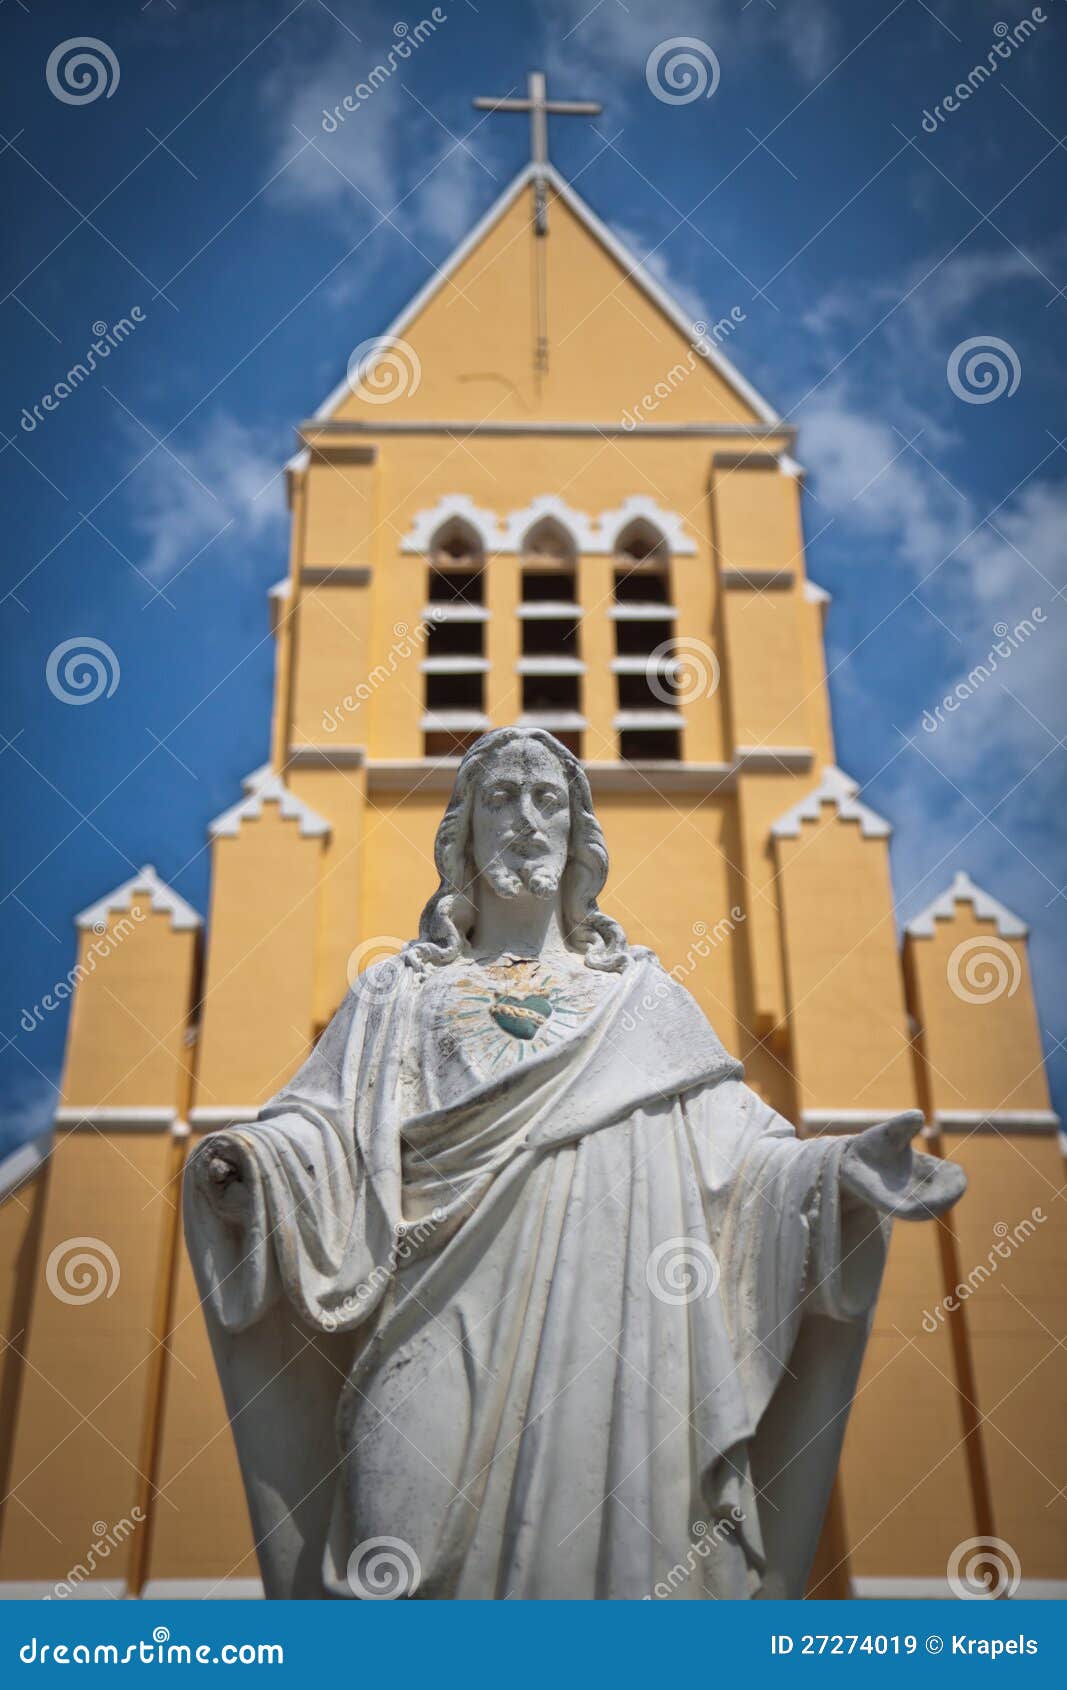 Statue of Jesus Christ and Church Stock Image - Image of blue, church ...